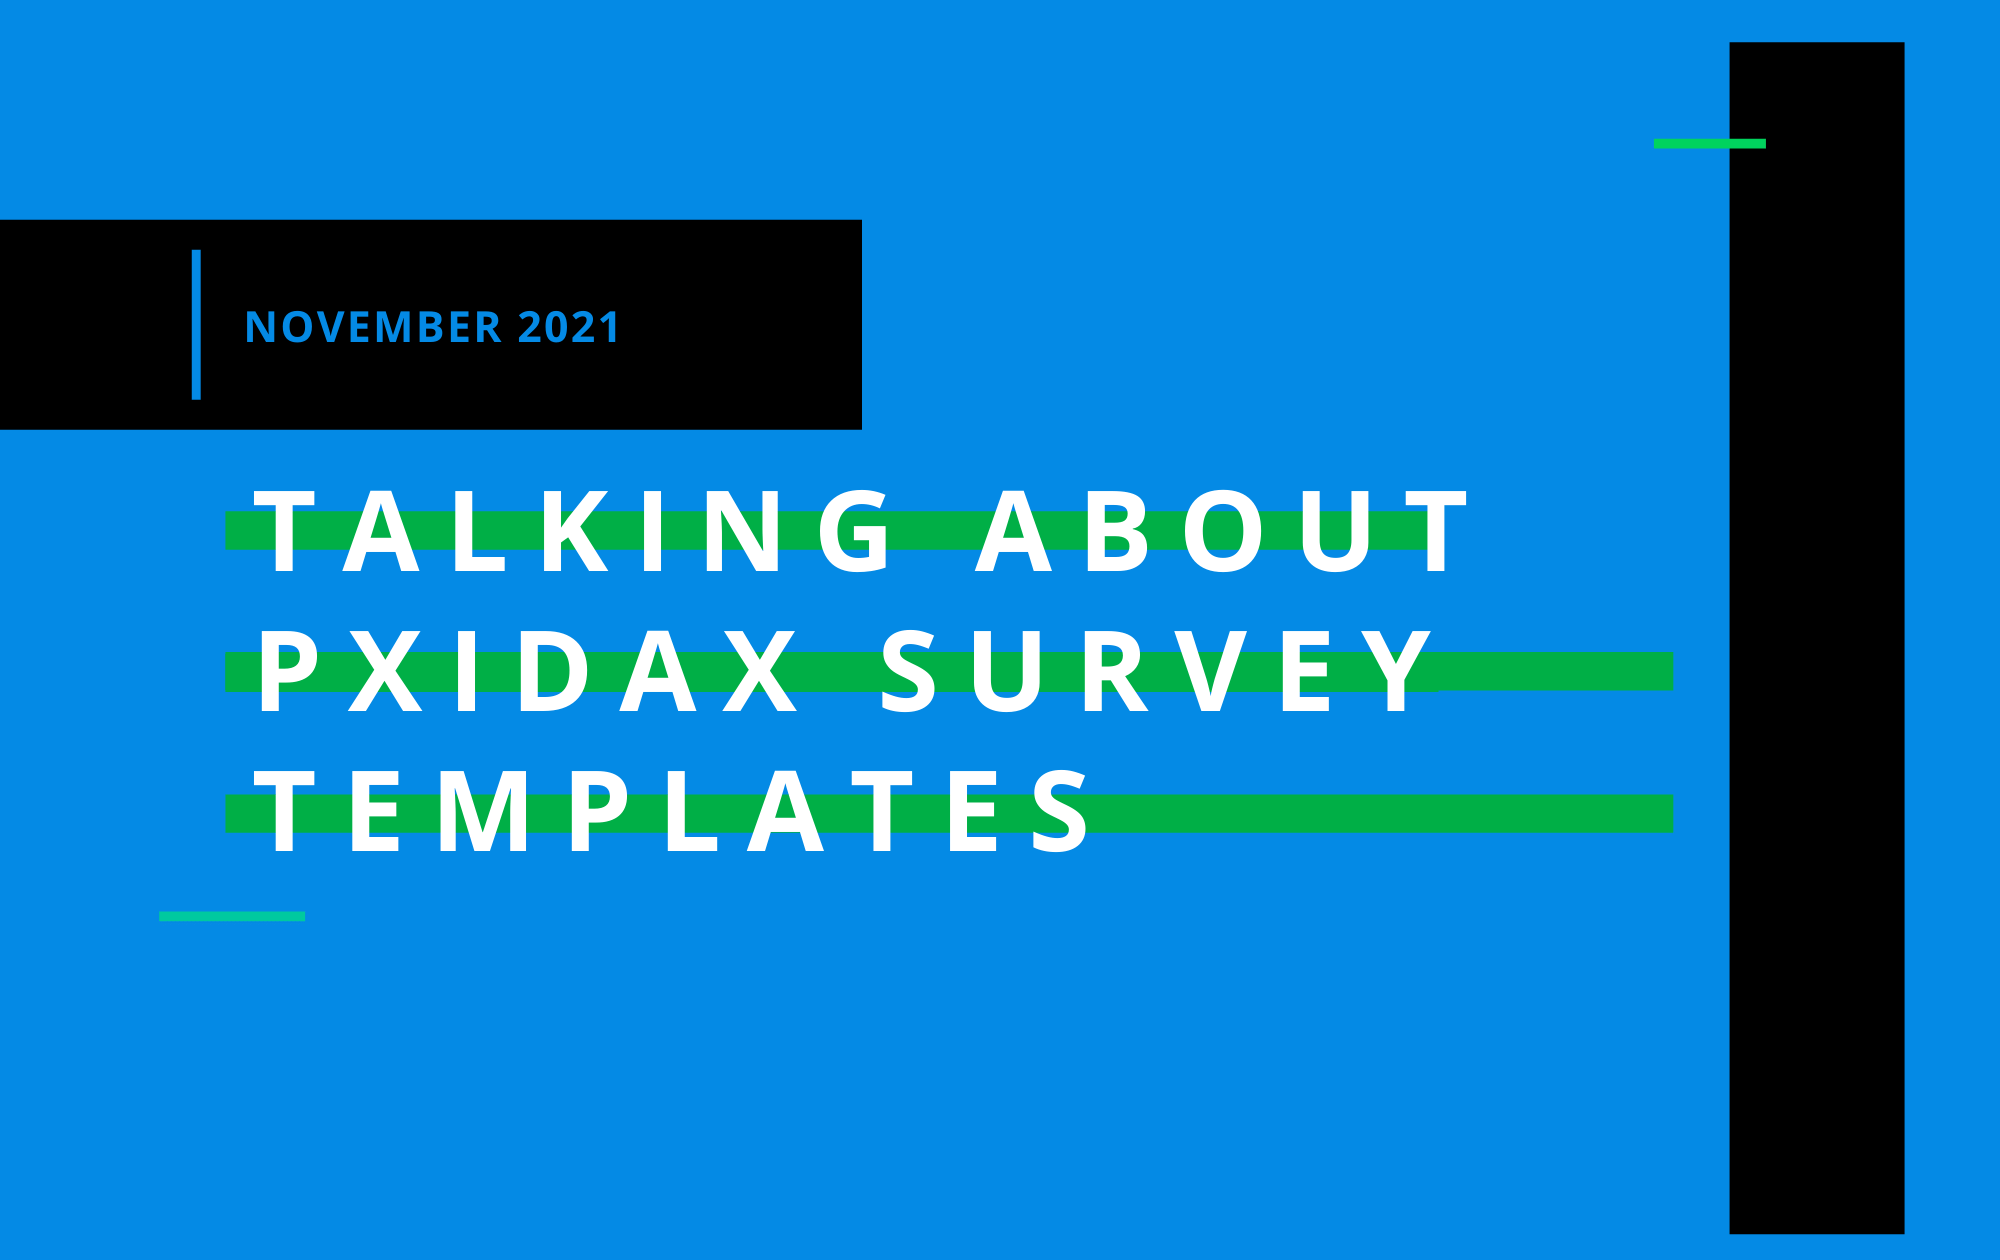 Survey Templates for Customer and Employee Experience (November 2021)